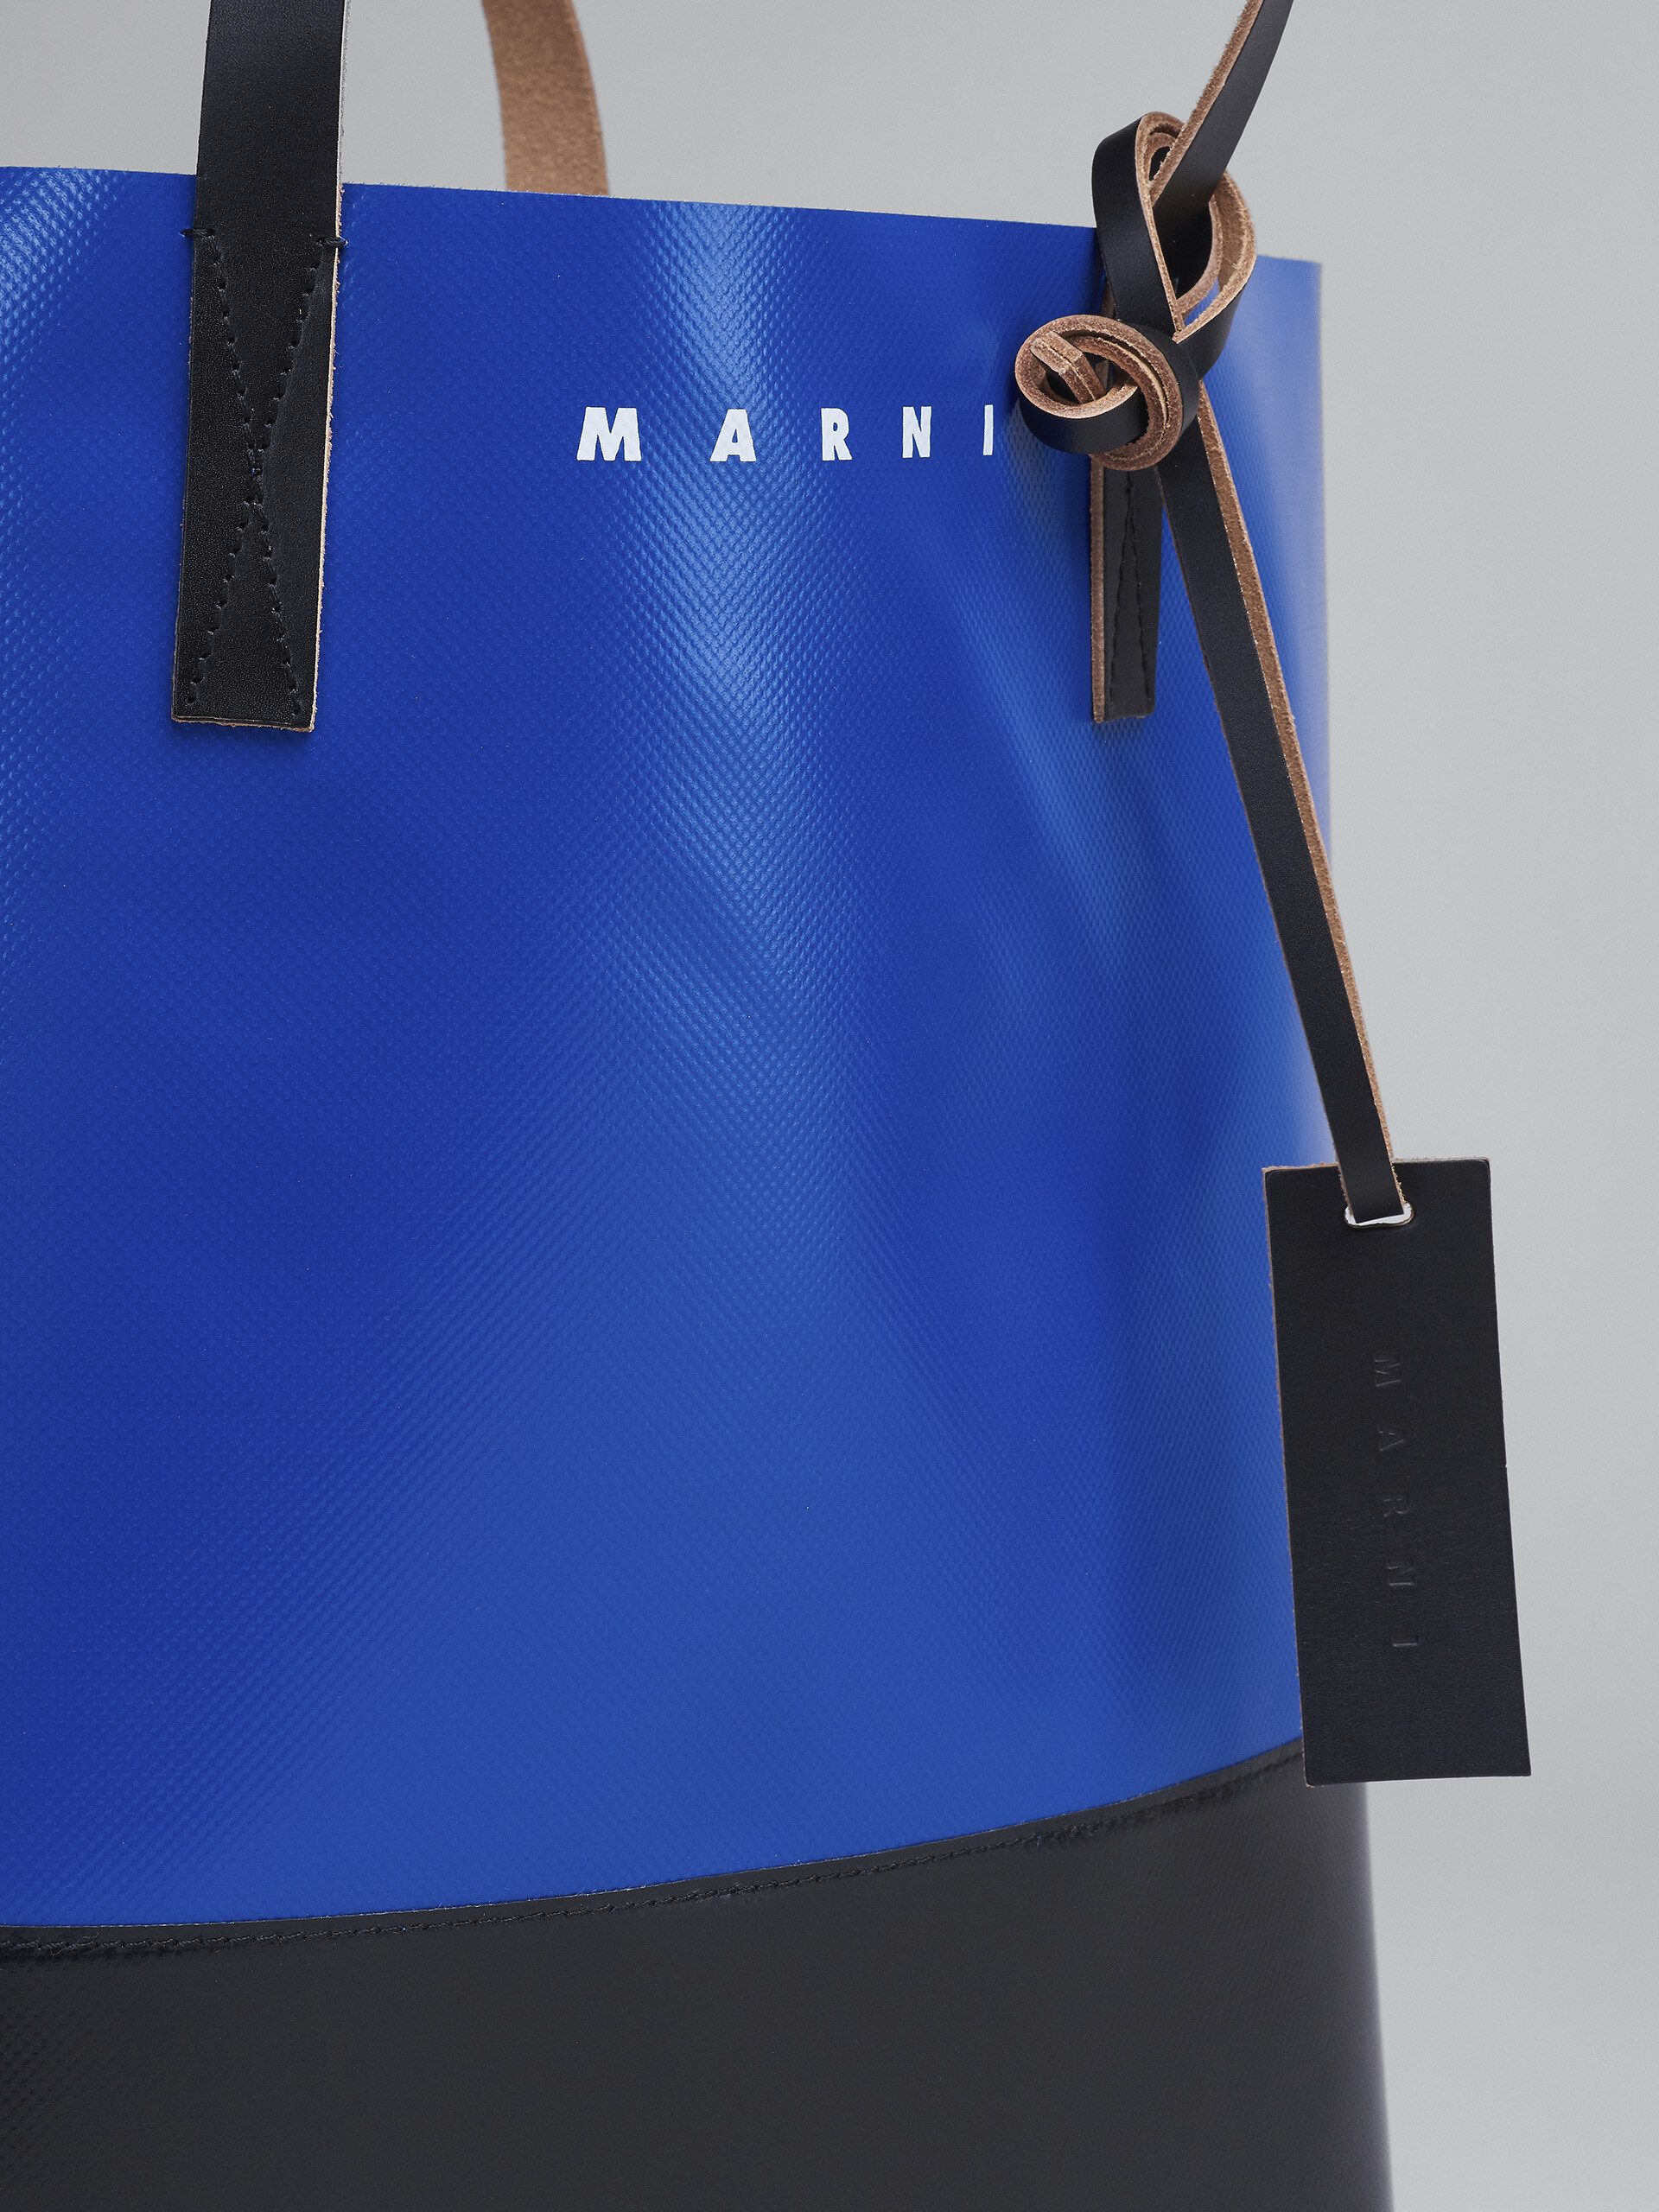 Tribeca shopping bag in blue and black - Shopping Bags - Image 5